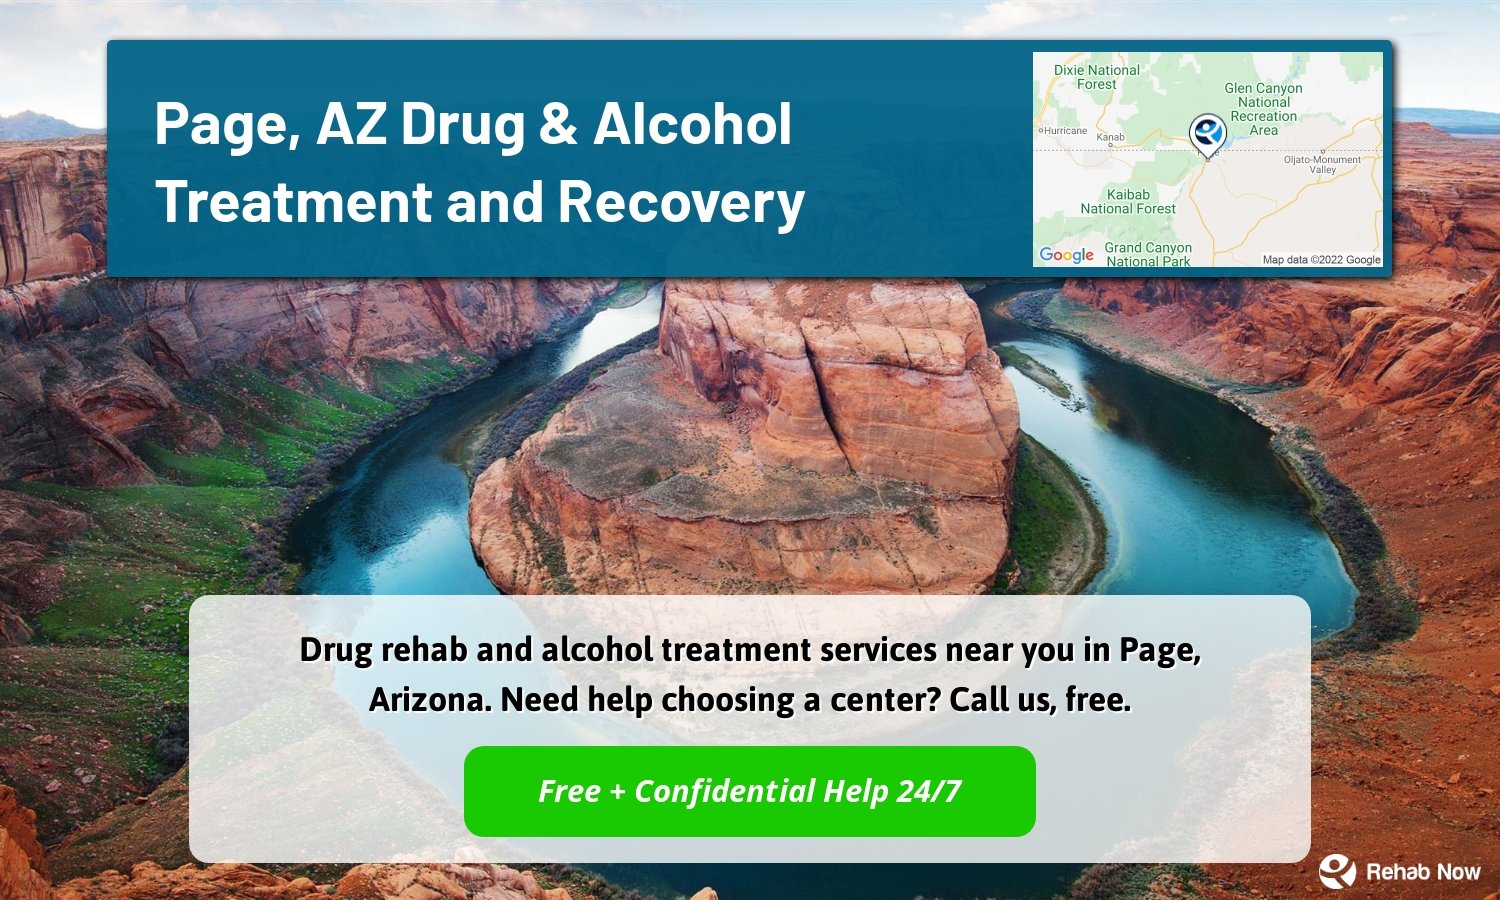 Drug rehab and alcohol treatment services near you in Page, Arizona. Need help choosing a center? Call us, free.